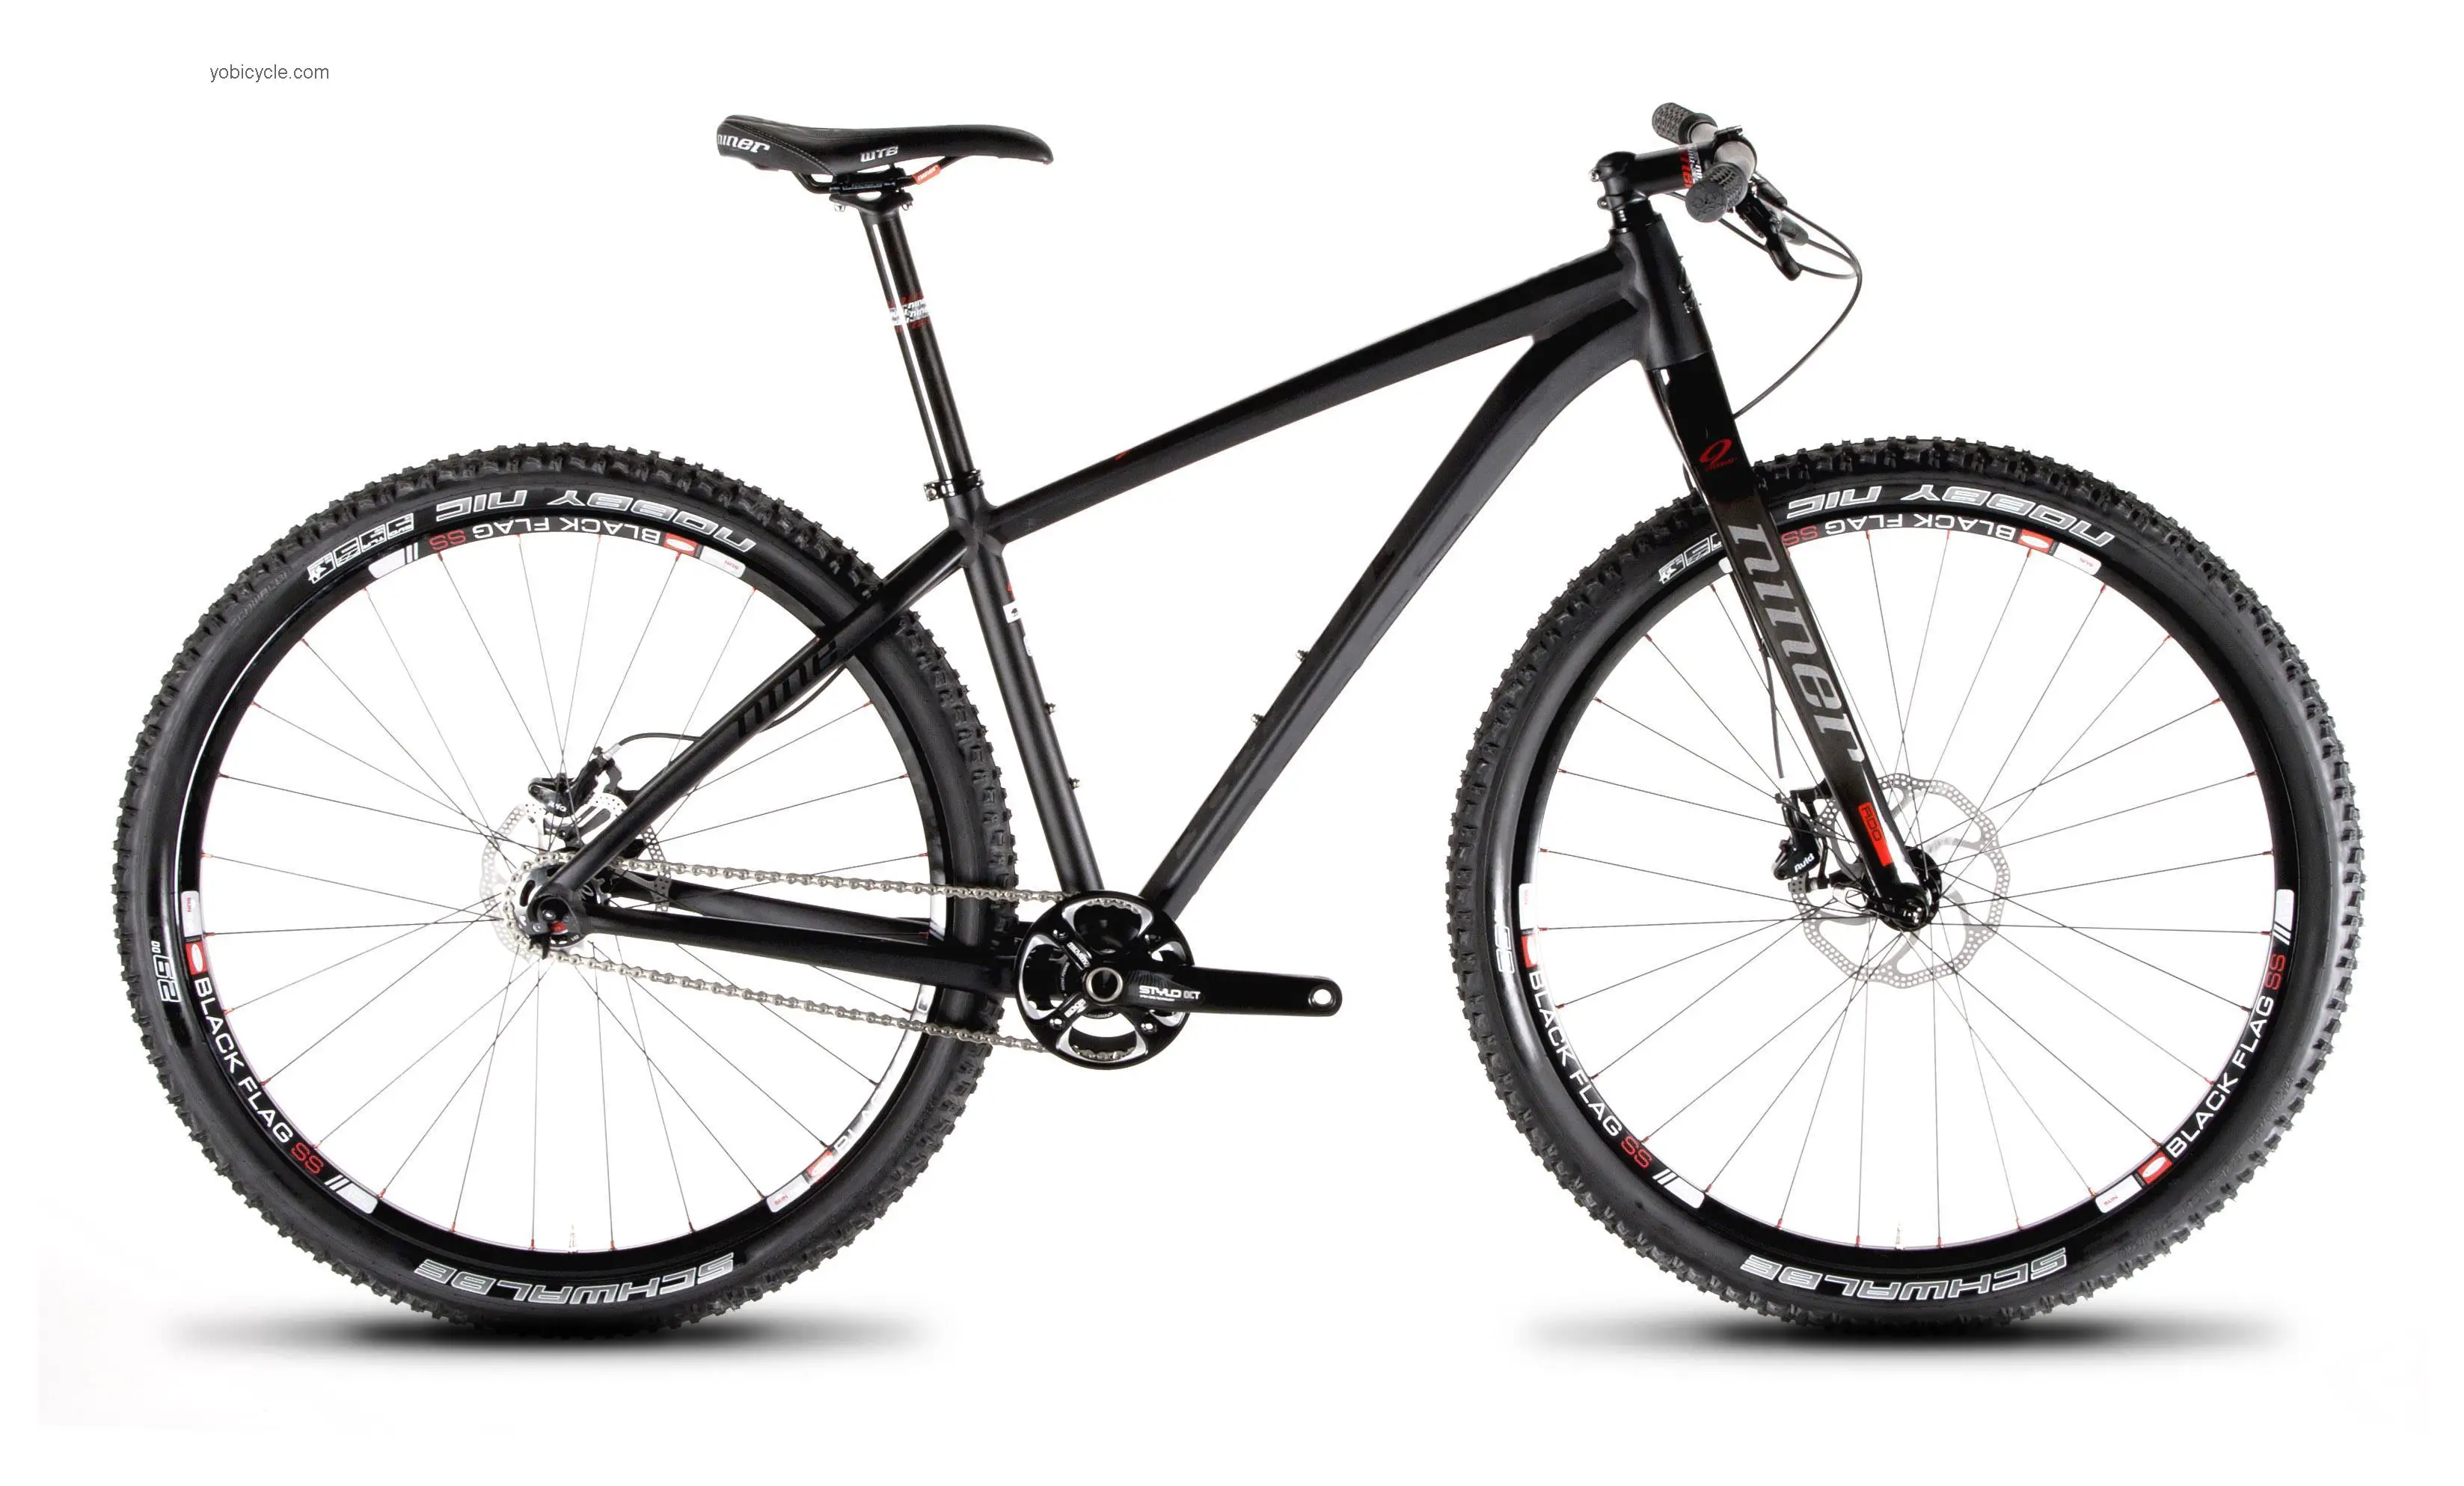 Niner One 9 2013 comparison online with competitors